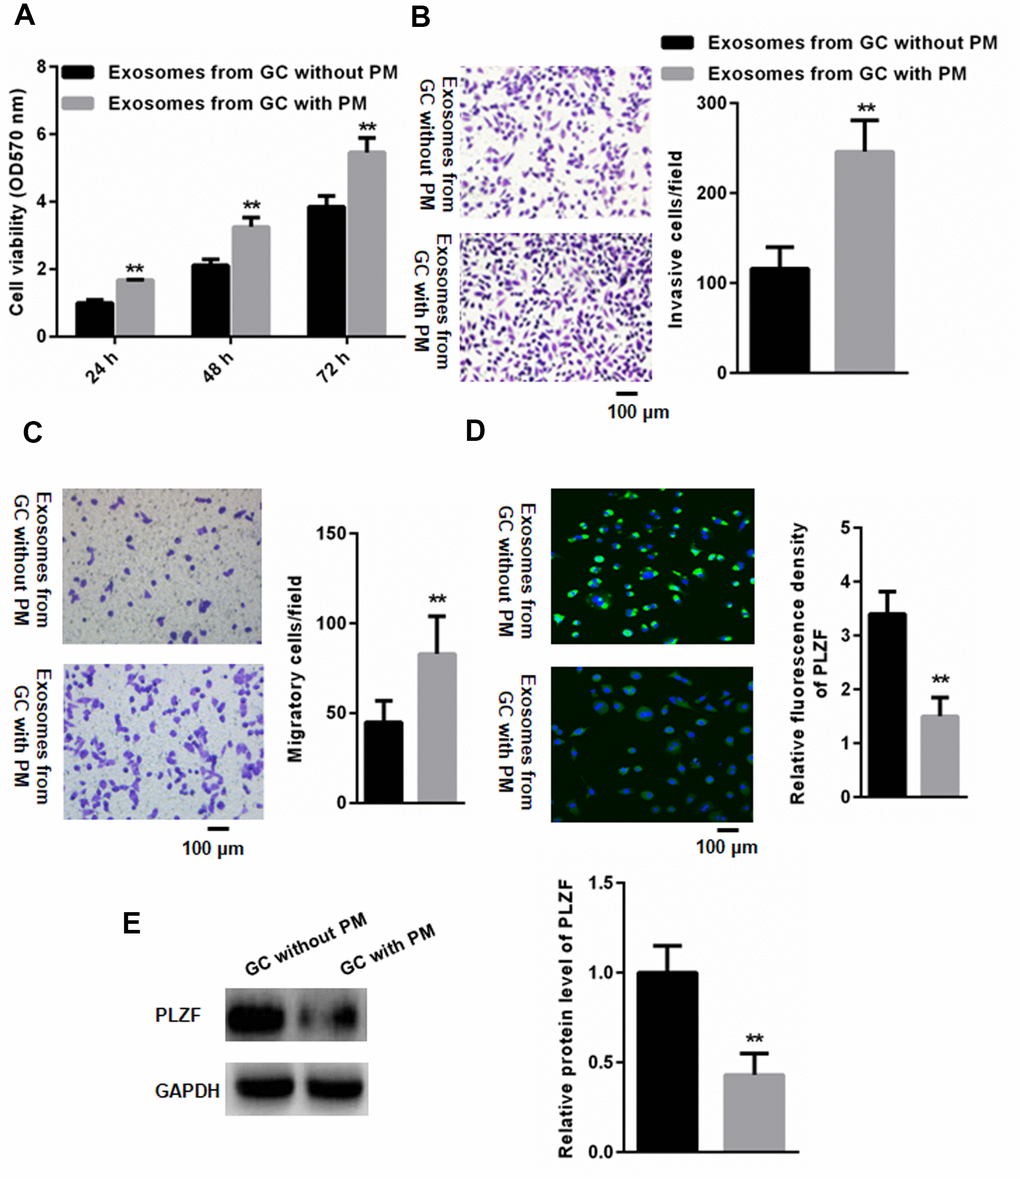 PM-derived EVs reduce PLZF expression in HMrSV5 cells and promote their invasive ability. (A) CCK-8 assay indicated that EVs isolated from GC patients with PM significantly increased the viability of HMrSV5 cells compared to that of without PM. (n=3, one way ANOVA) (B) Trans-well assay illustrating invasion of HMrSV5 cells incubated with EVs isolated from peritoneal fluid of GC patients with and without PM. (C) For migration assays, more adhesive HMrSV5 cells were found in those pretreated by EVs isolated from peritoneal fluid in GC patients with PM compared those without PM. (D) Immunofluorescence and (E) western blotting showing that pretreatment with EVs isolated from patients with PM reduces the PLZF expression in HMrSV5 cells. (n=3, Student’s t-test for B, C, D, E).